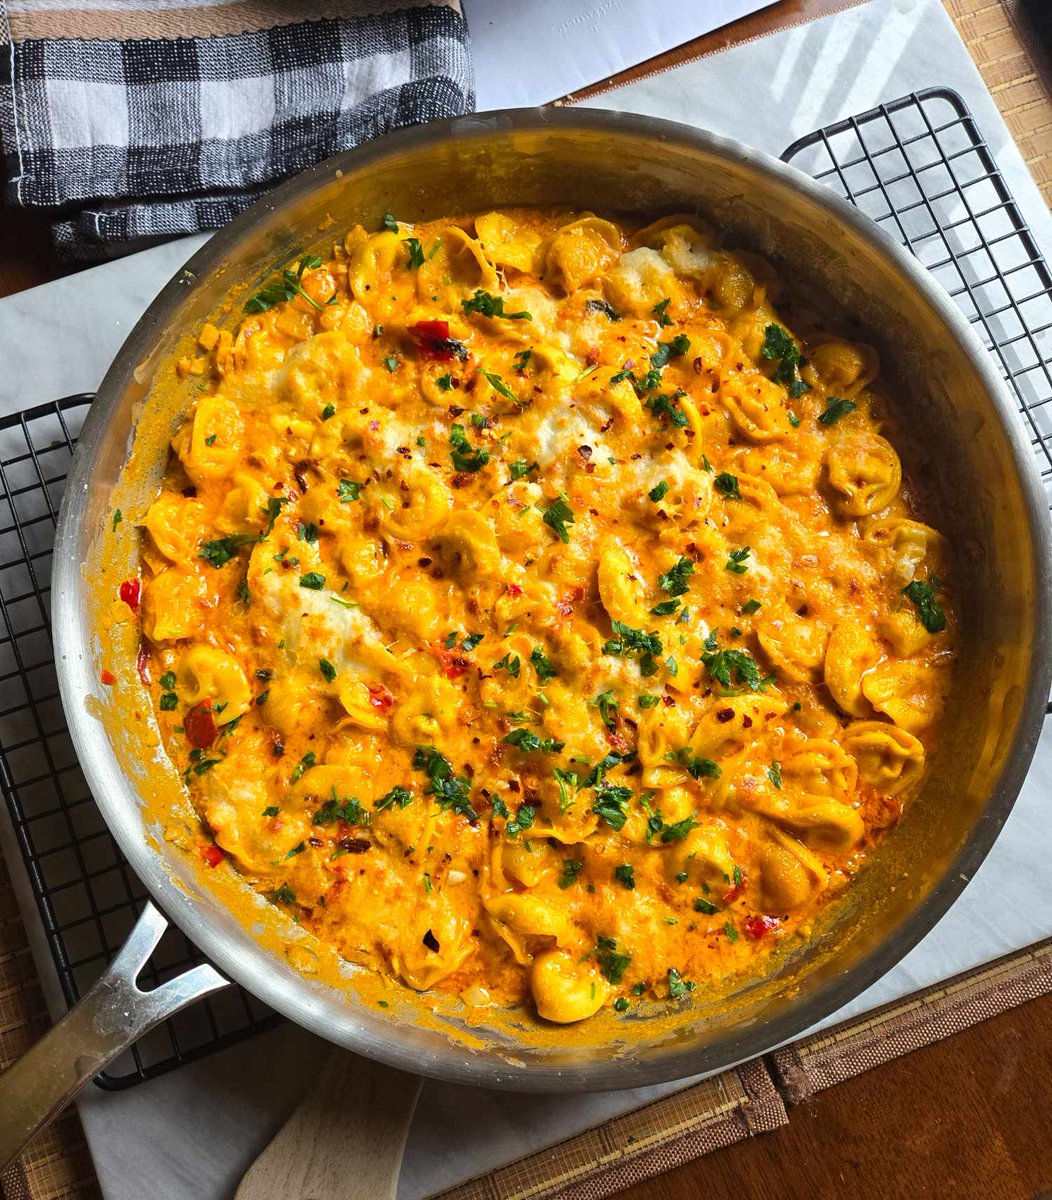 thehappyveg.ca/recipes/creamy… Head to the blog for my Creamy Tomato Tortellini Skillet with Broiled Mozz. Minimal ingredients / prep and maximum flavour. <3 #vegetarian #pasta #meatlessmonday #RecipeOfTheDay #goodeats #happyvegrecipes